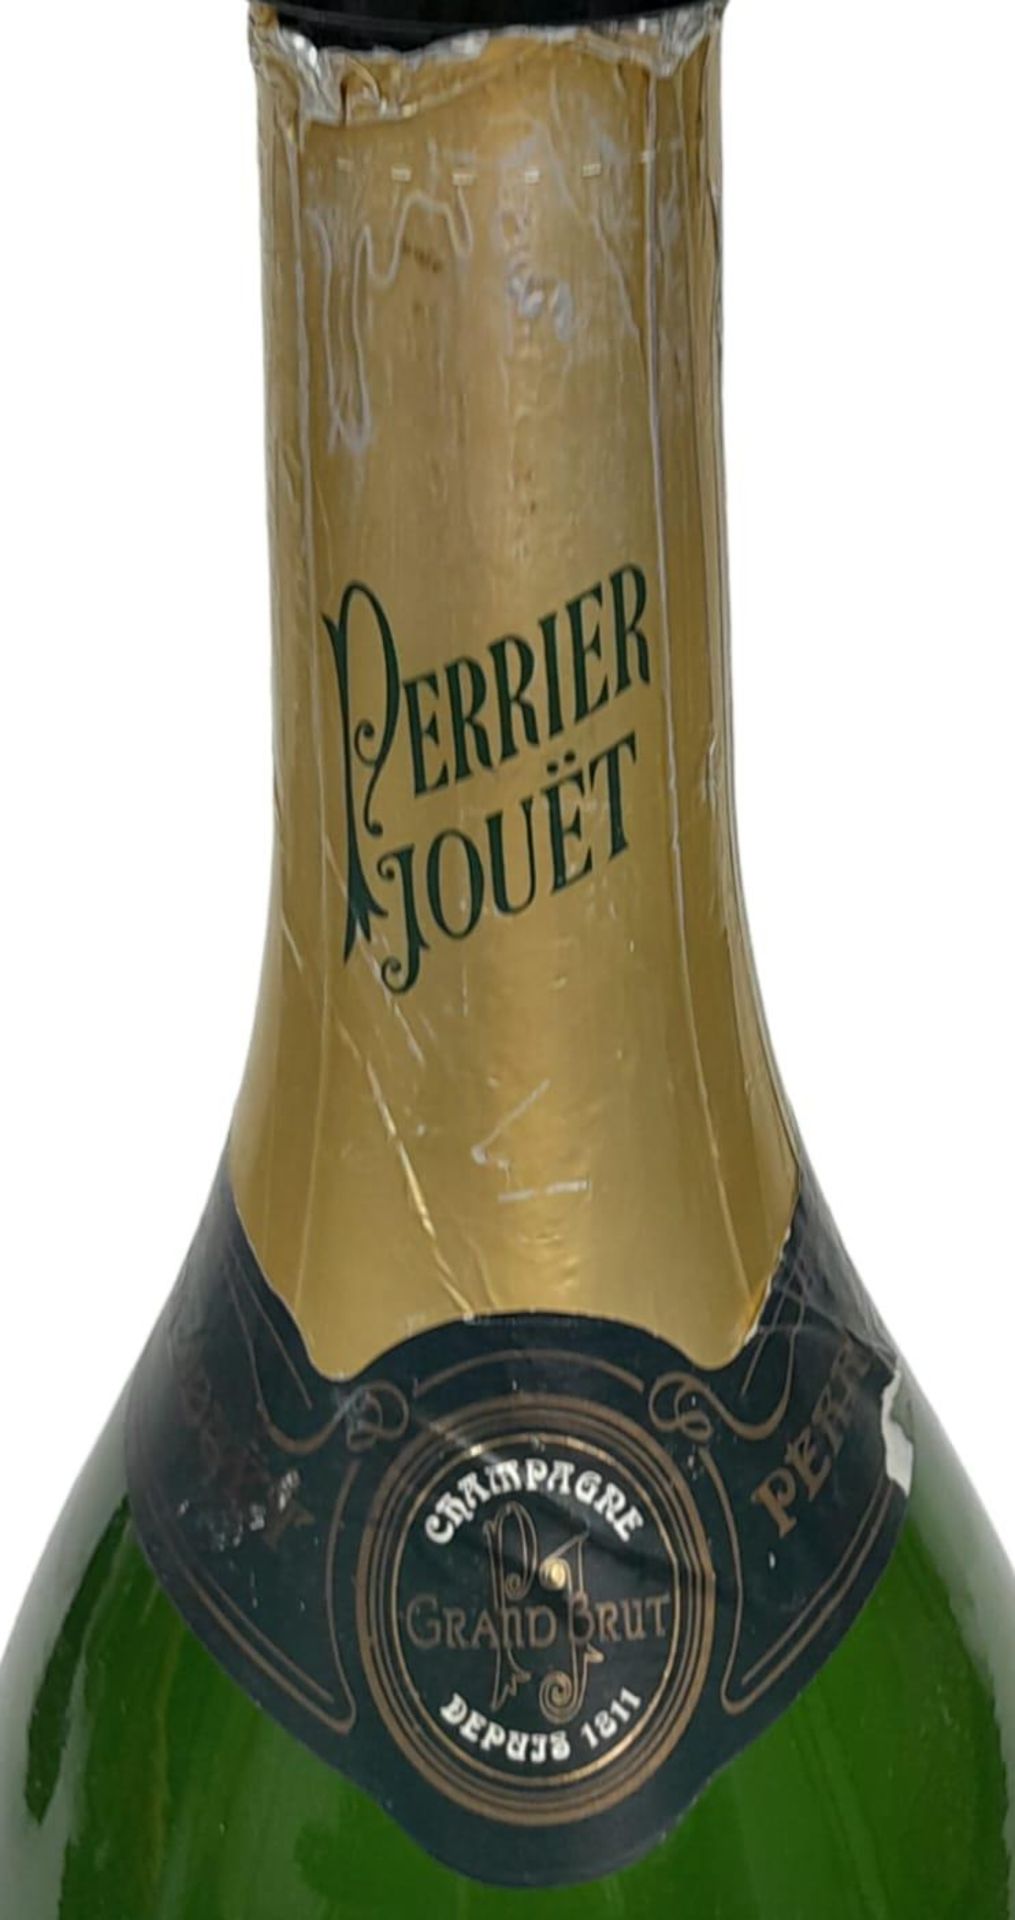 A Salmanazar (12 bottles) of Perrier-Jouet Branded Champagne. Unfortunately the bottle is empty! - Image 3 of 6